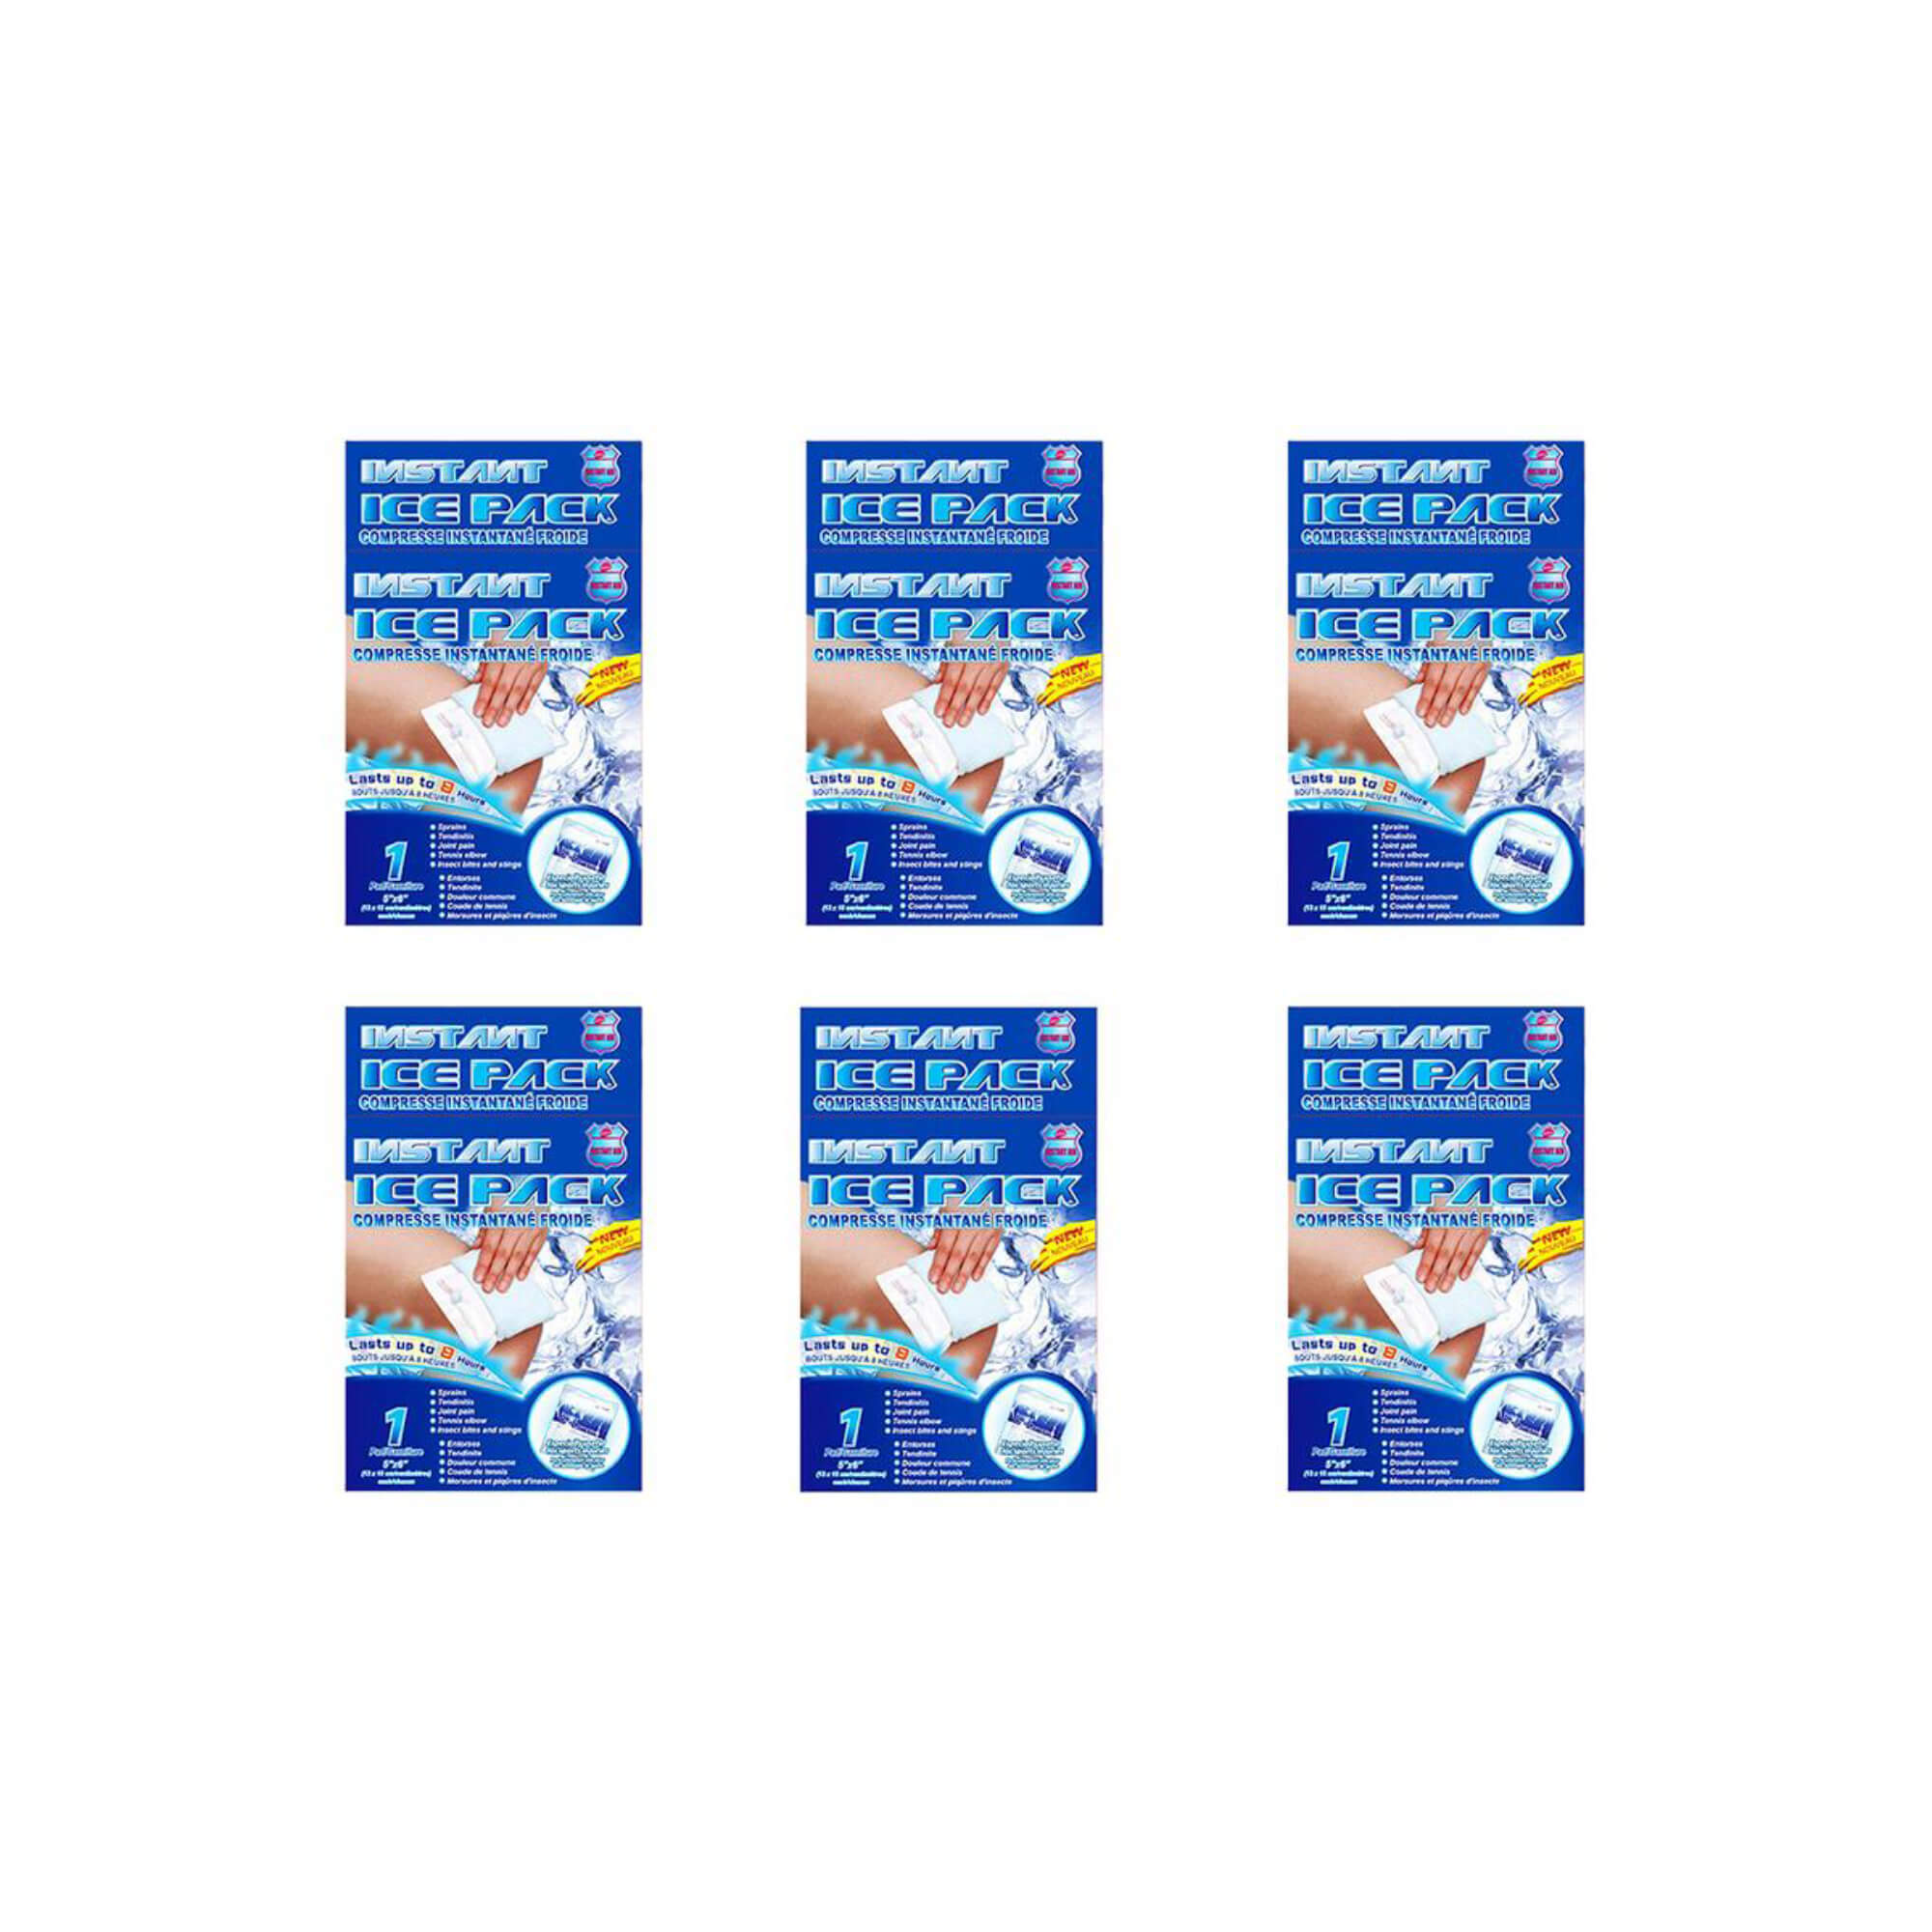 Purest Instant Aid- Instant Ice Pack - Pack of 6